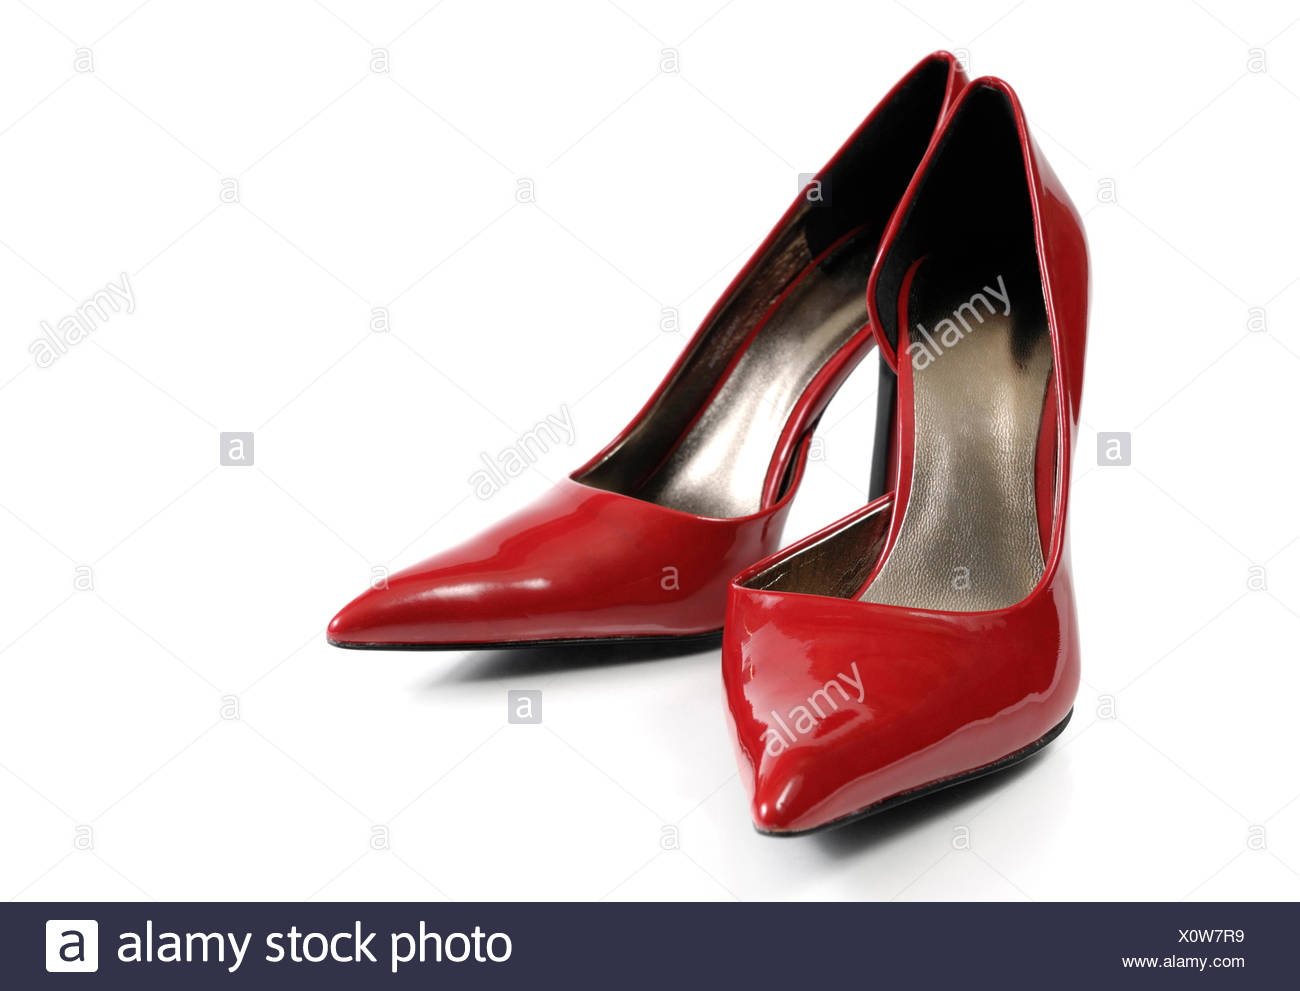 stylish shoes red